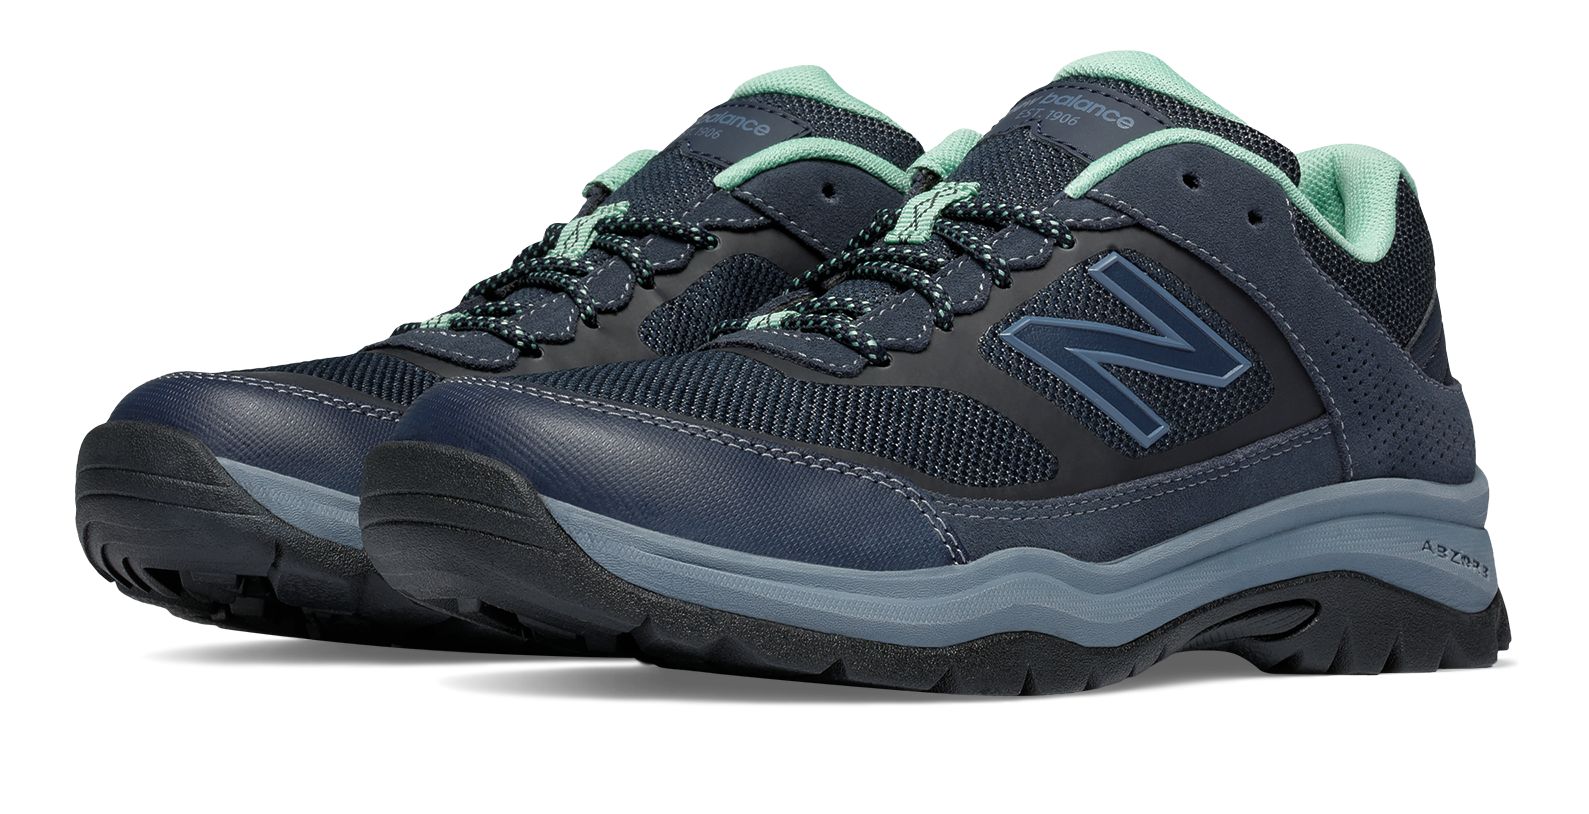 Off on WW669GR at Joe's New Balance Outlet